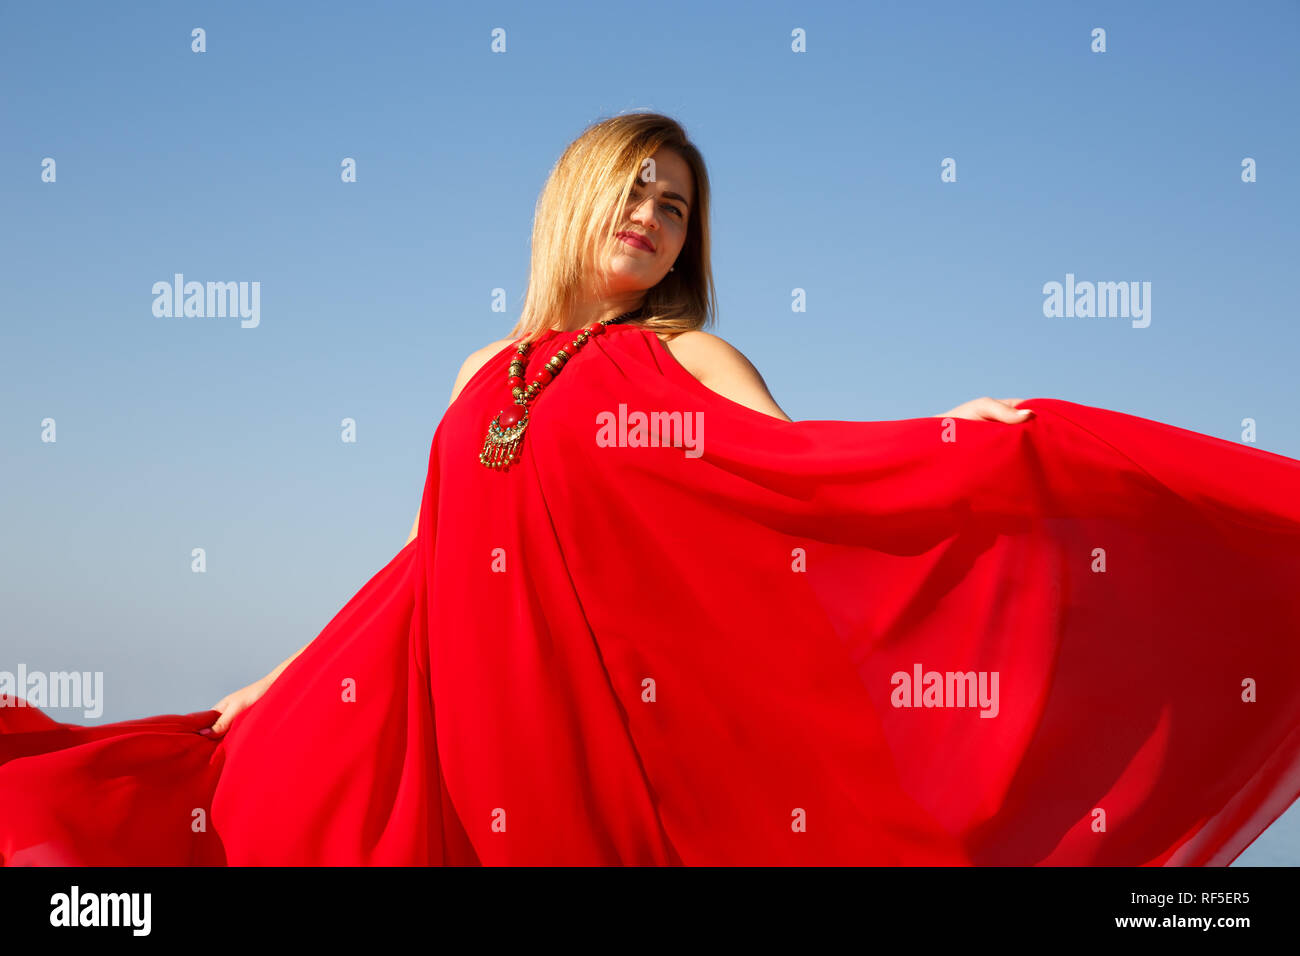 Woman in the red dress with necklace close up picture. Stock Photo